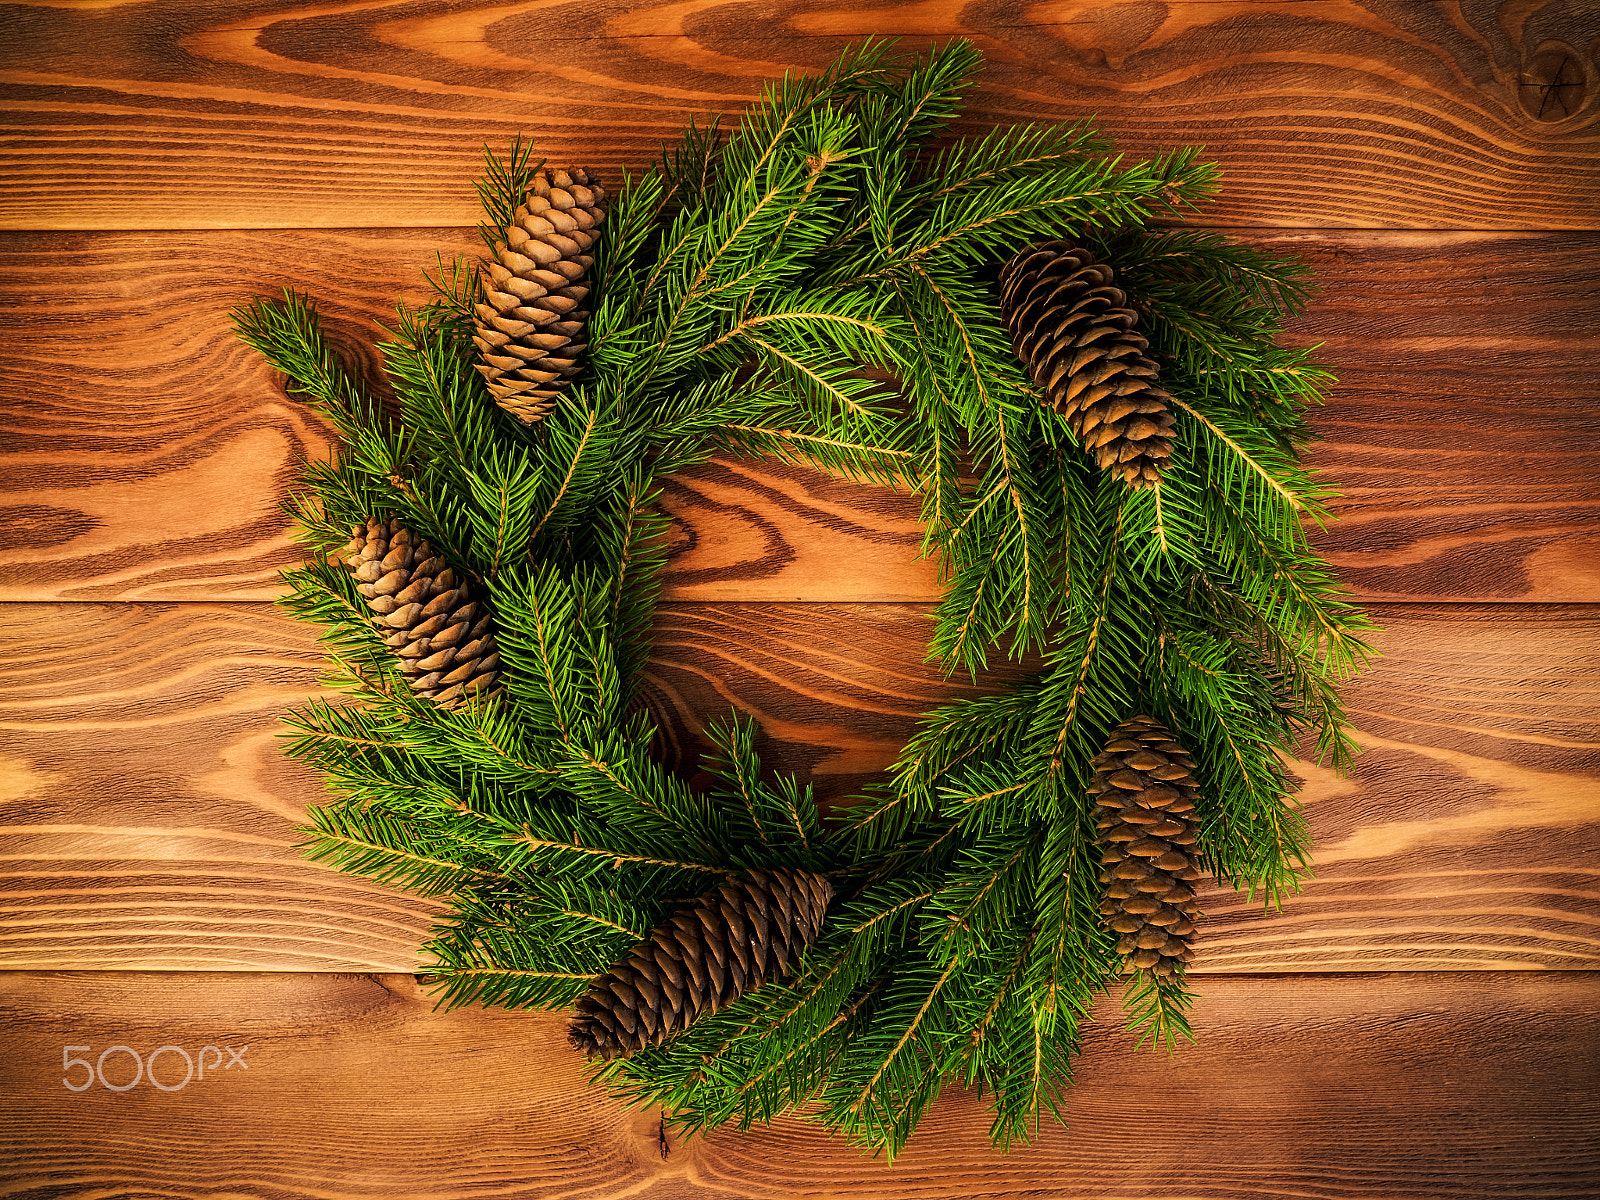 Olympus OM-D E-M1 sample photo. Wreath on the wooden board. christmas and new year concept photography